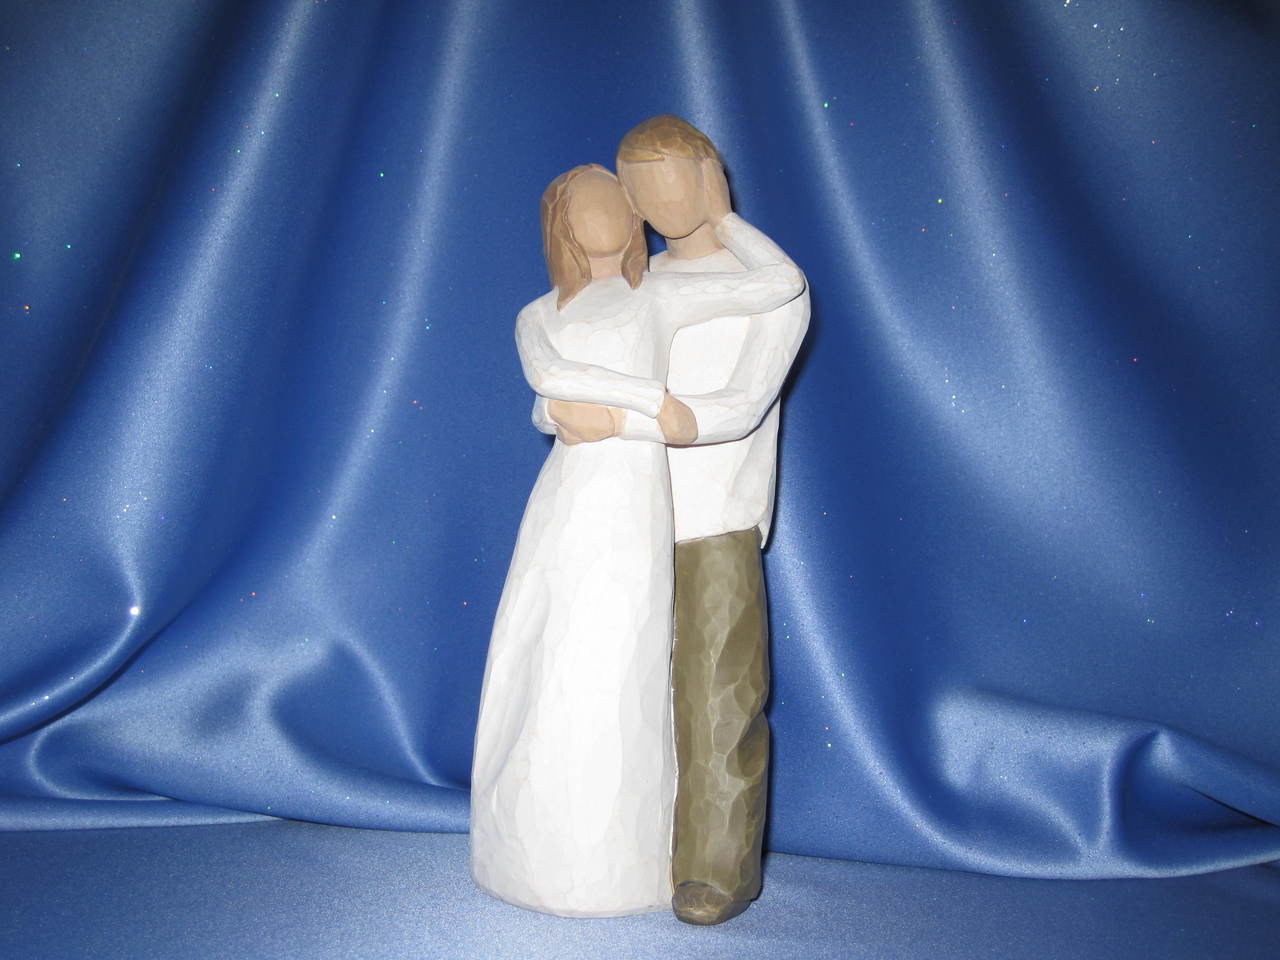 Primary image for Willow Tree "Together" Figurine.